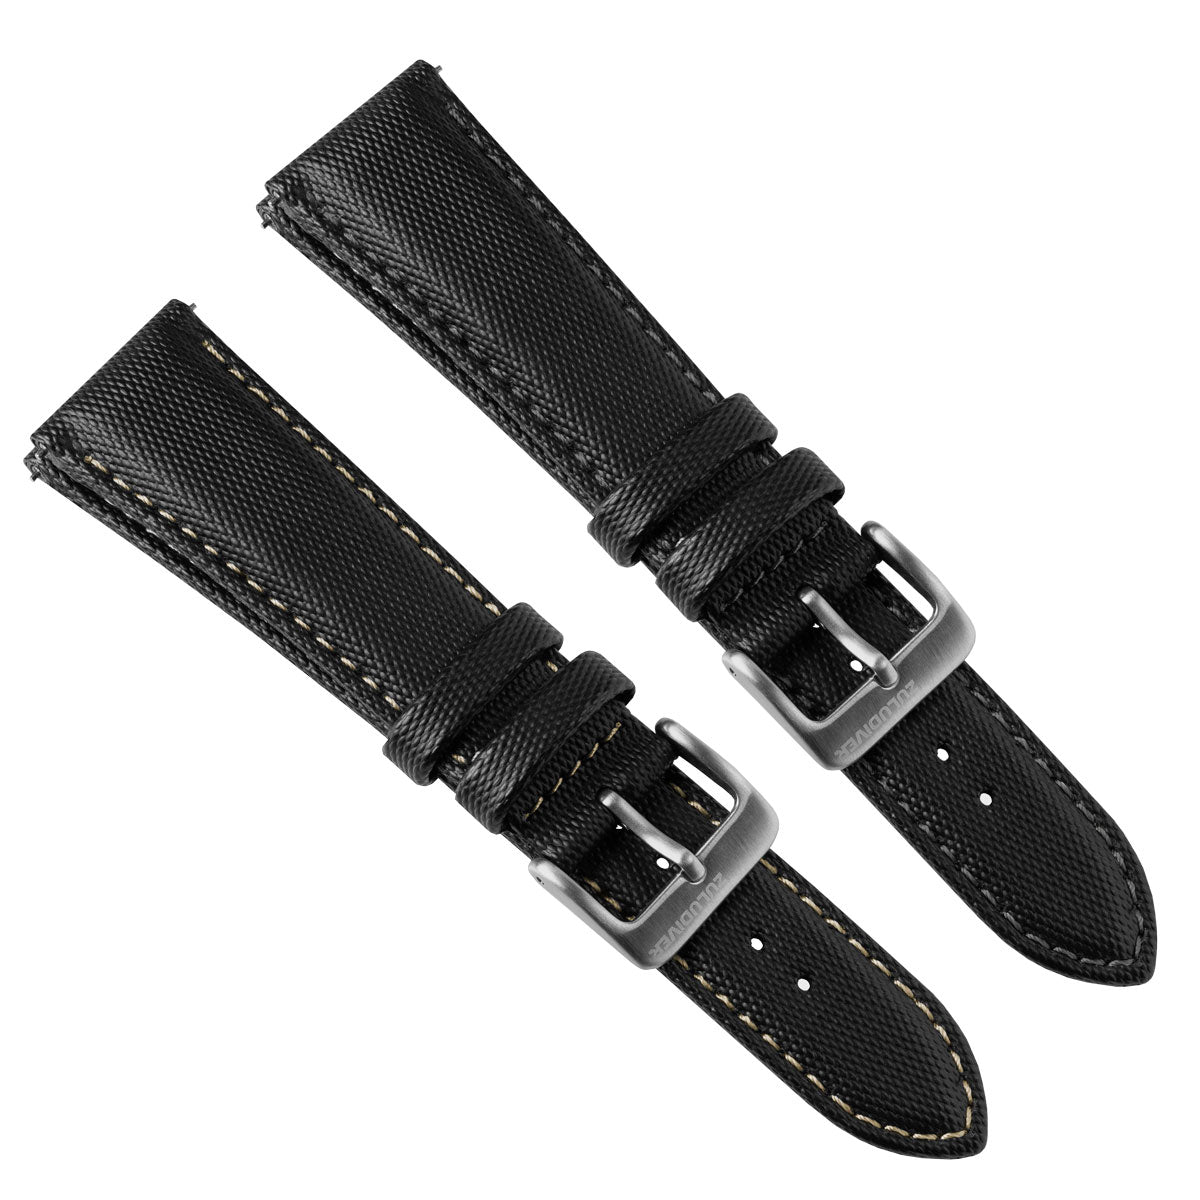 Mayday Sailcloth Padded Divers Watch Strap - Grey Stitching - ZULUDIVER